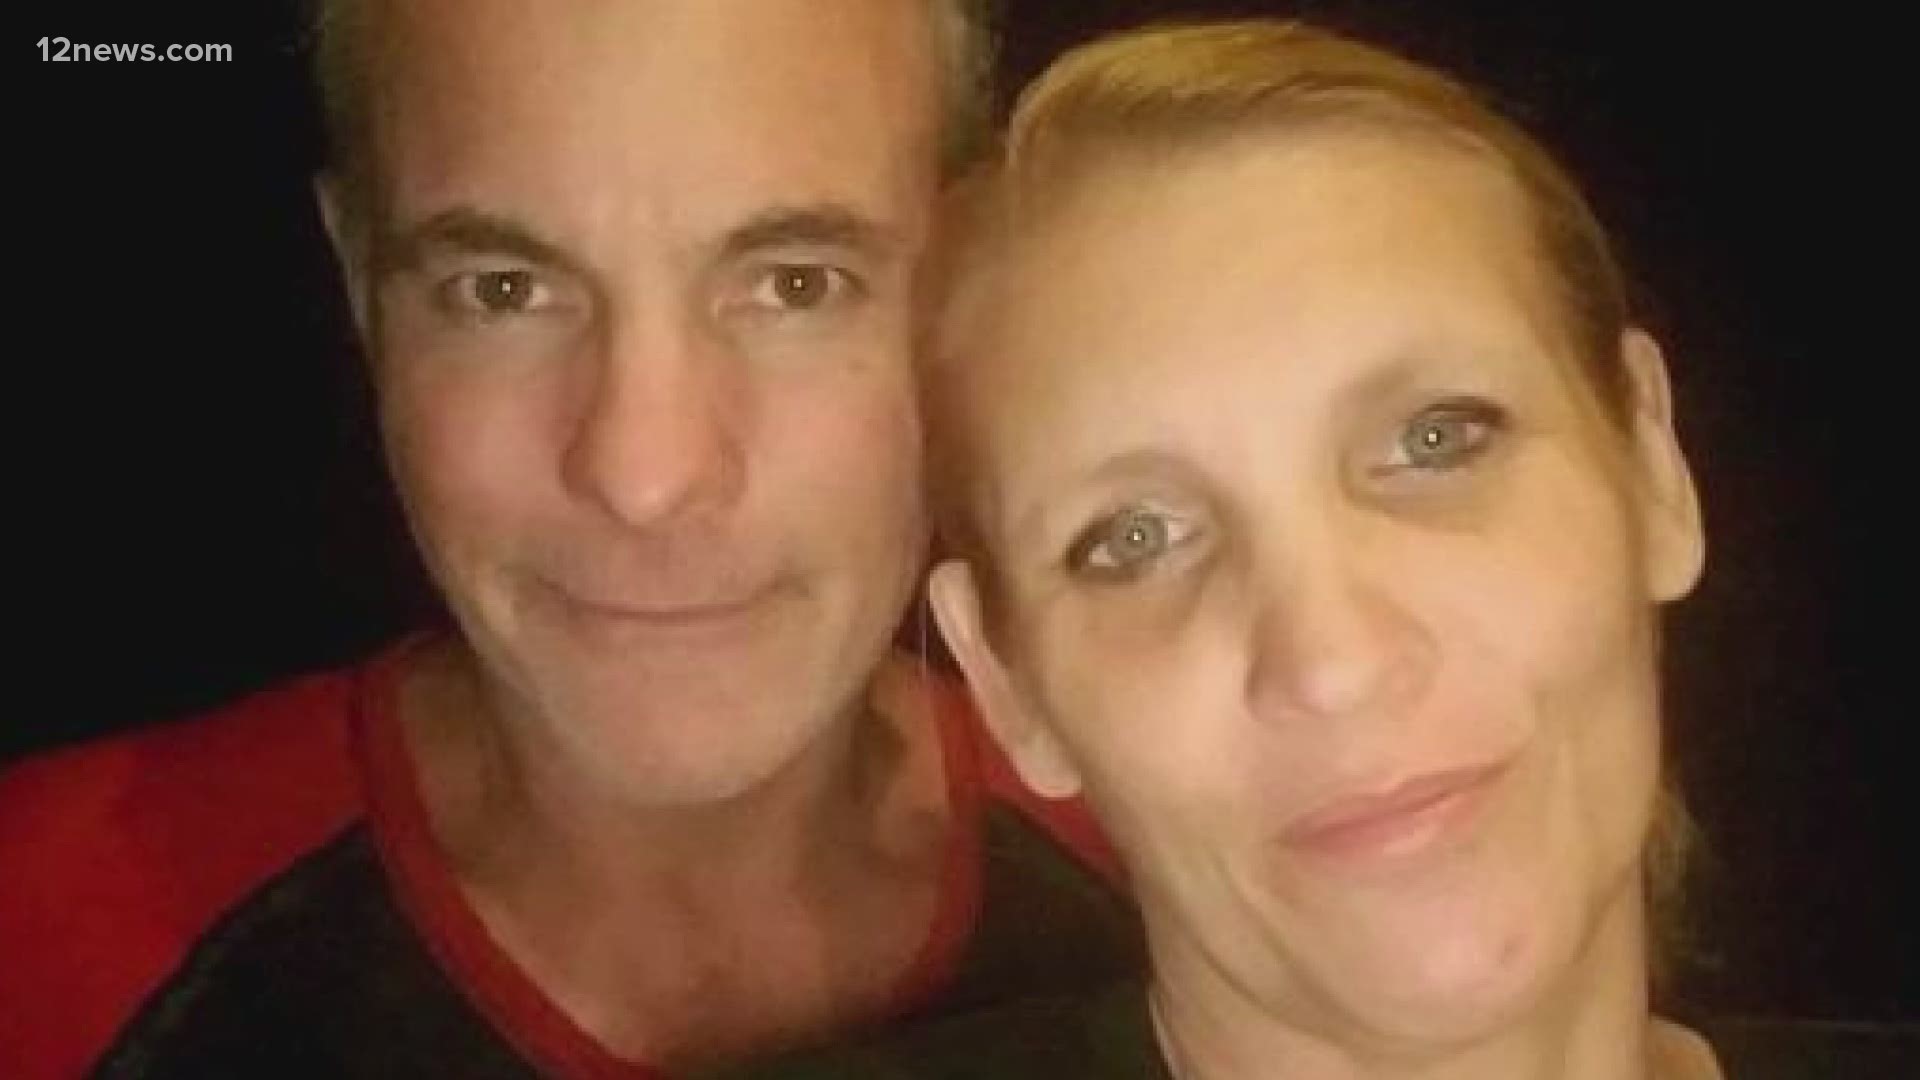 Pamela Cooper died after working an overtime shift at a Phoenix 911 call center while recovering from COVID-19. The city was asked for help months before her death.